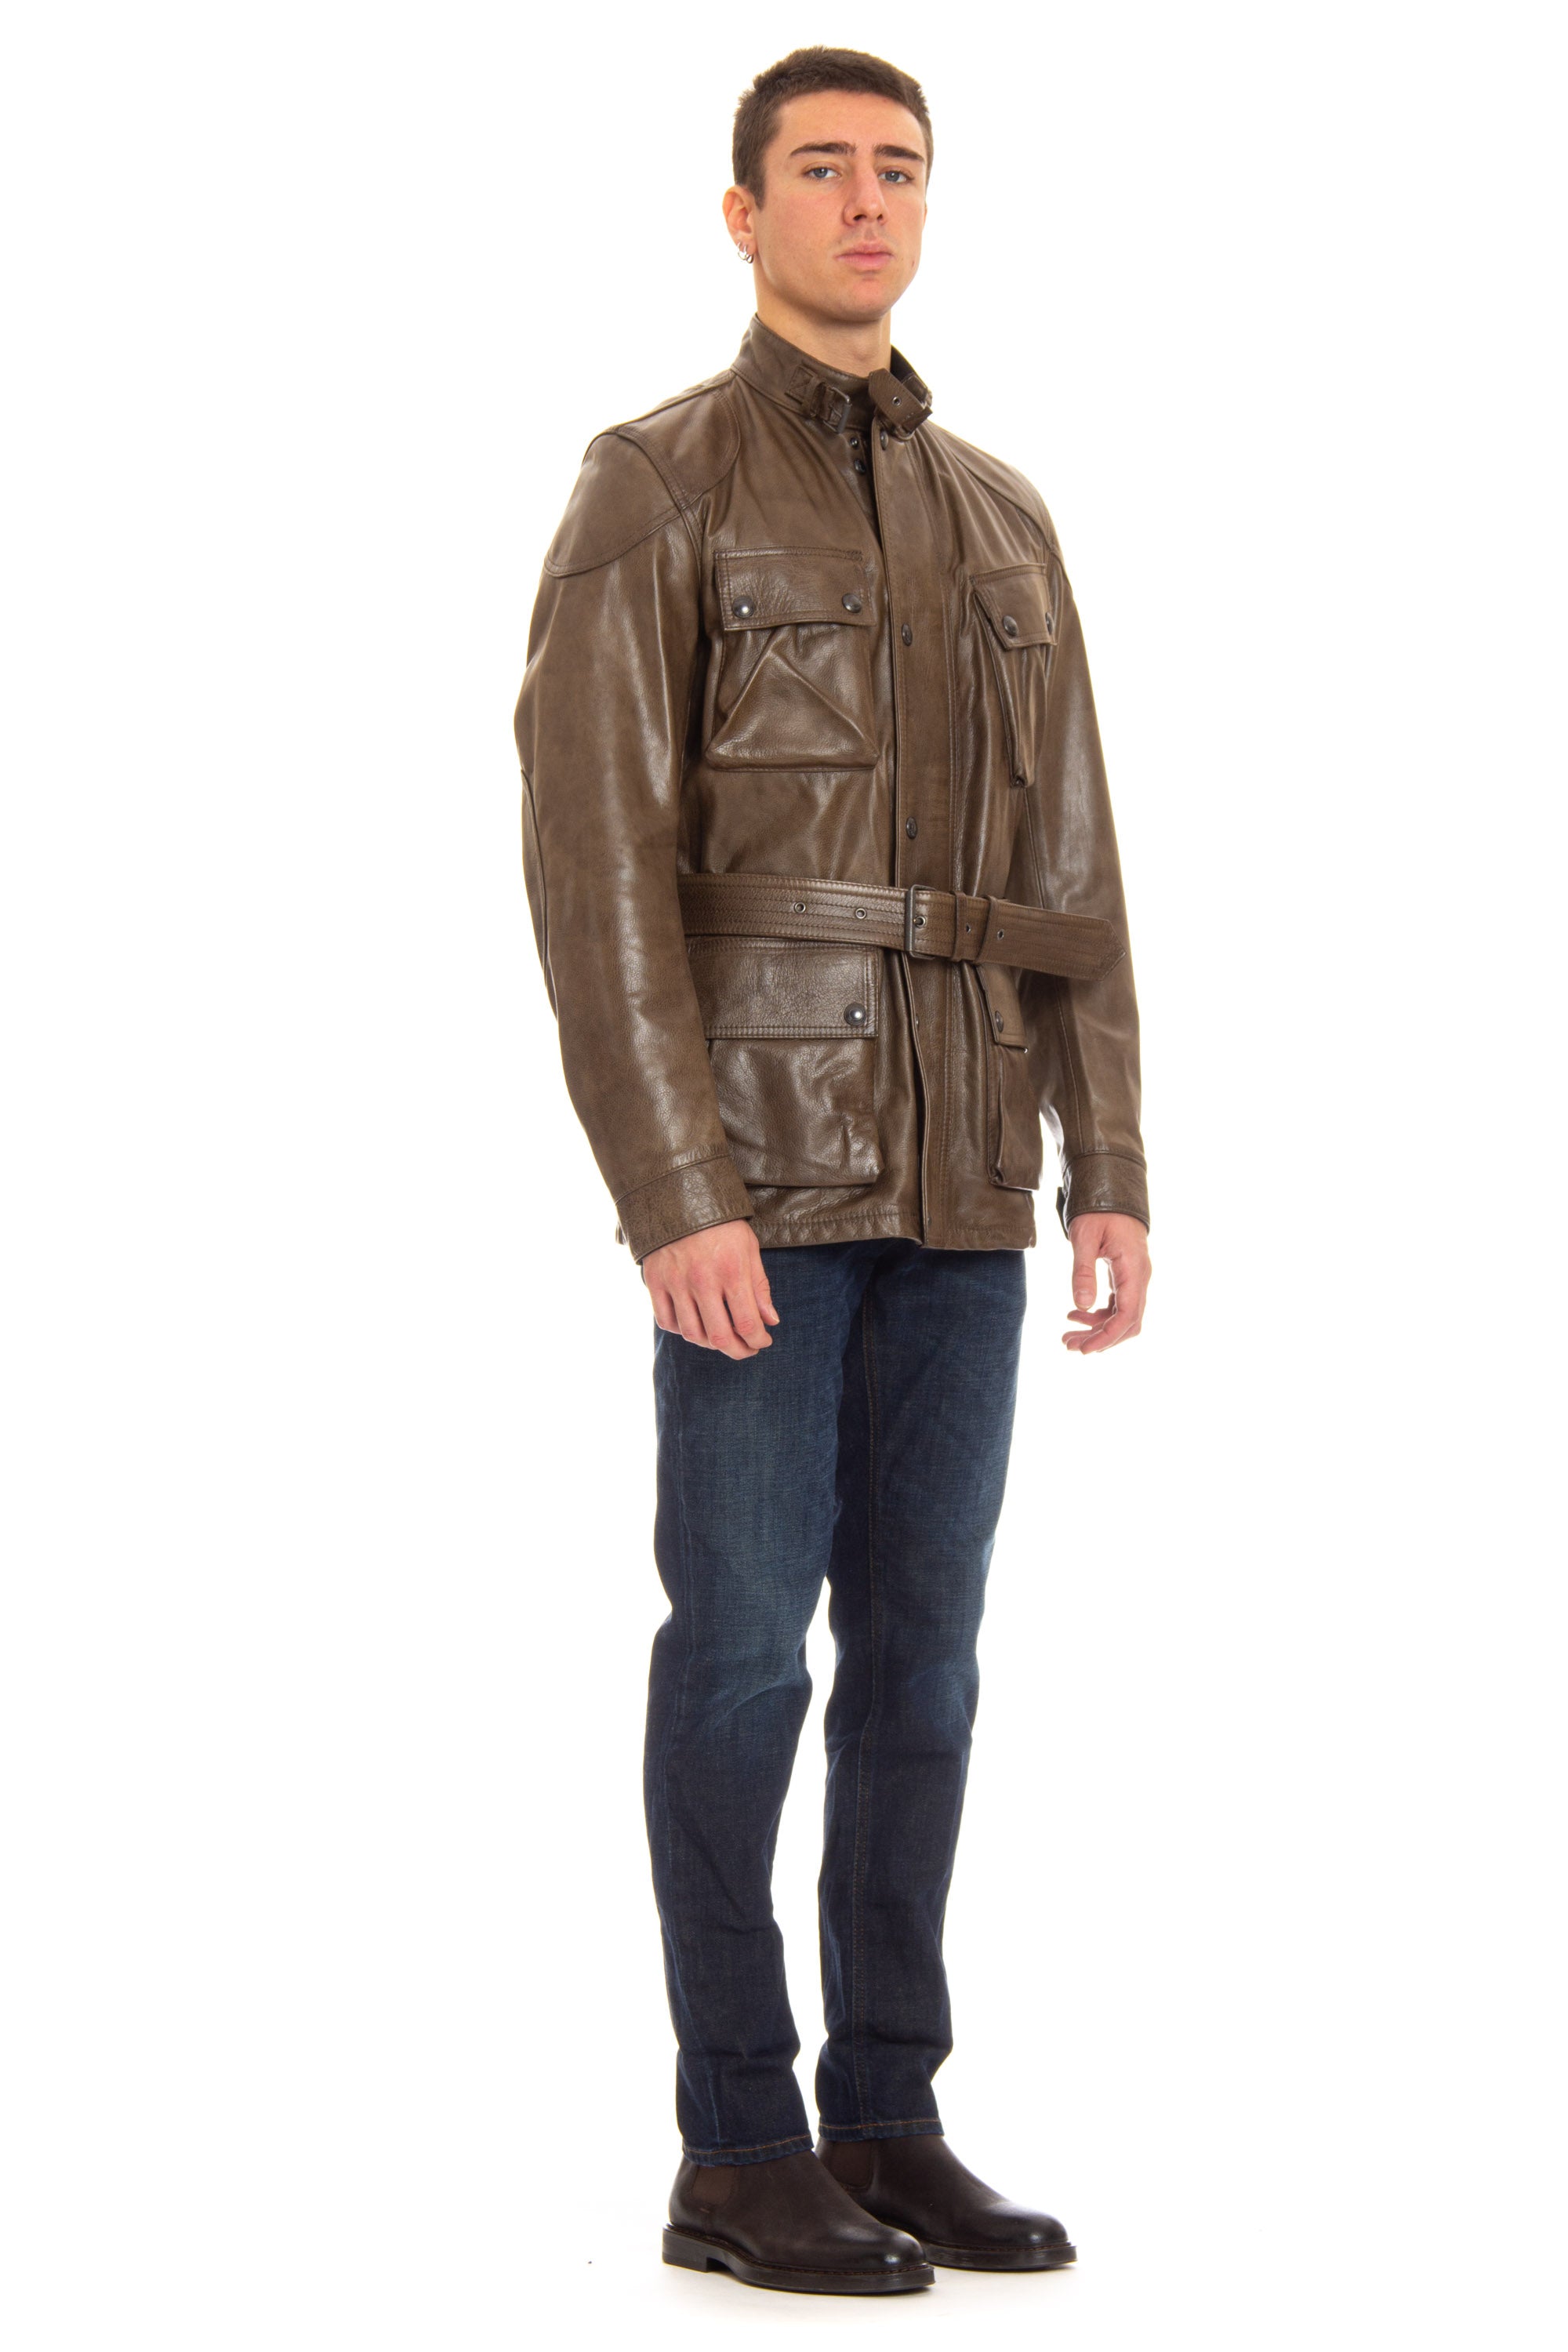 Trialmaster Panther field jacket in leather